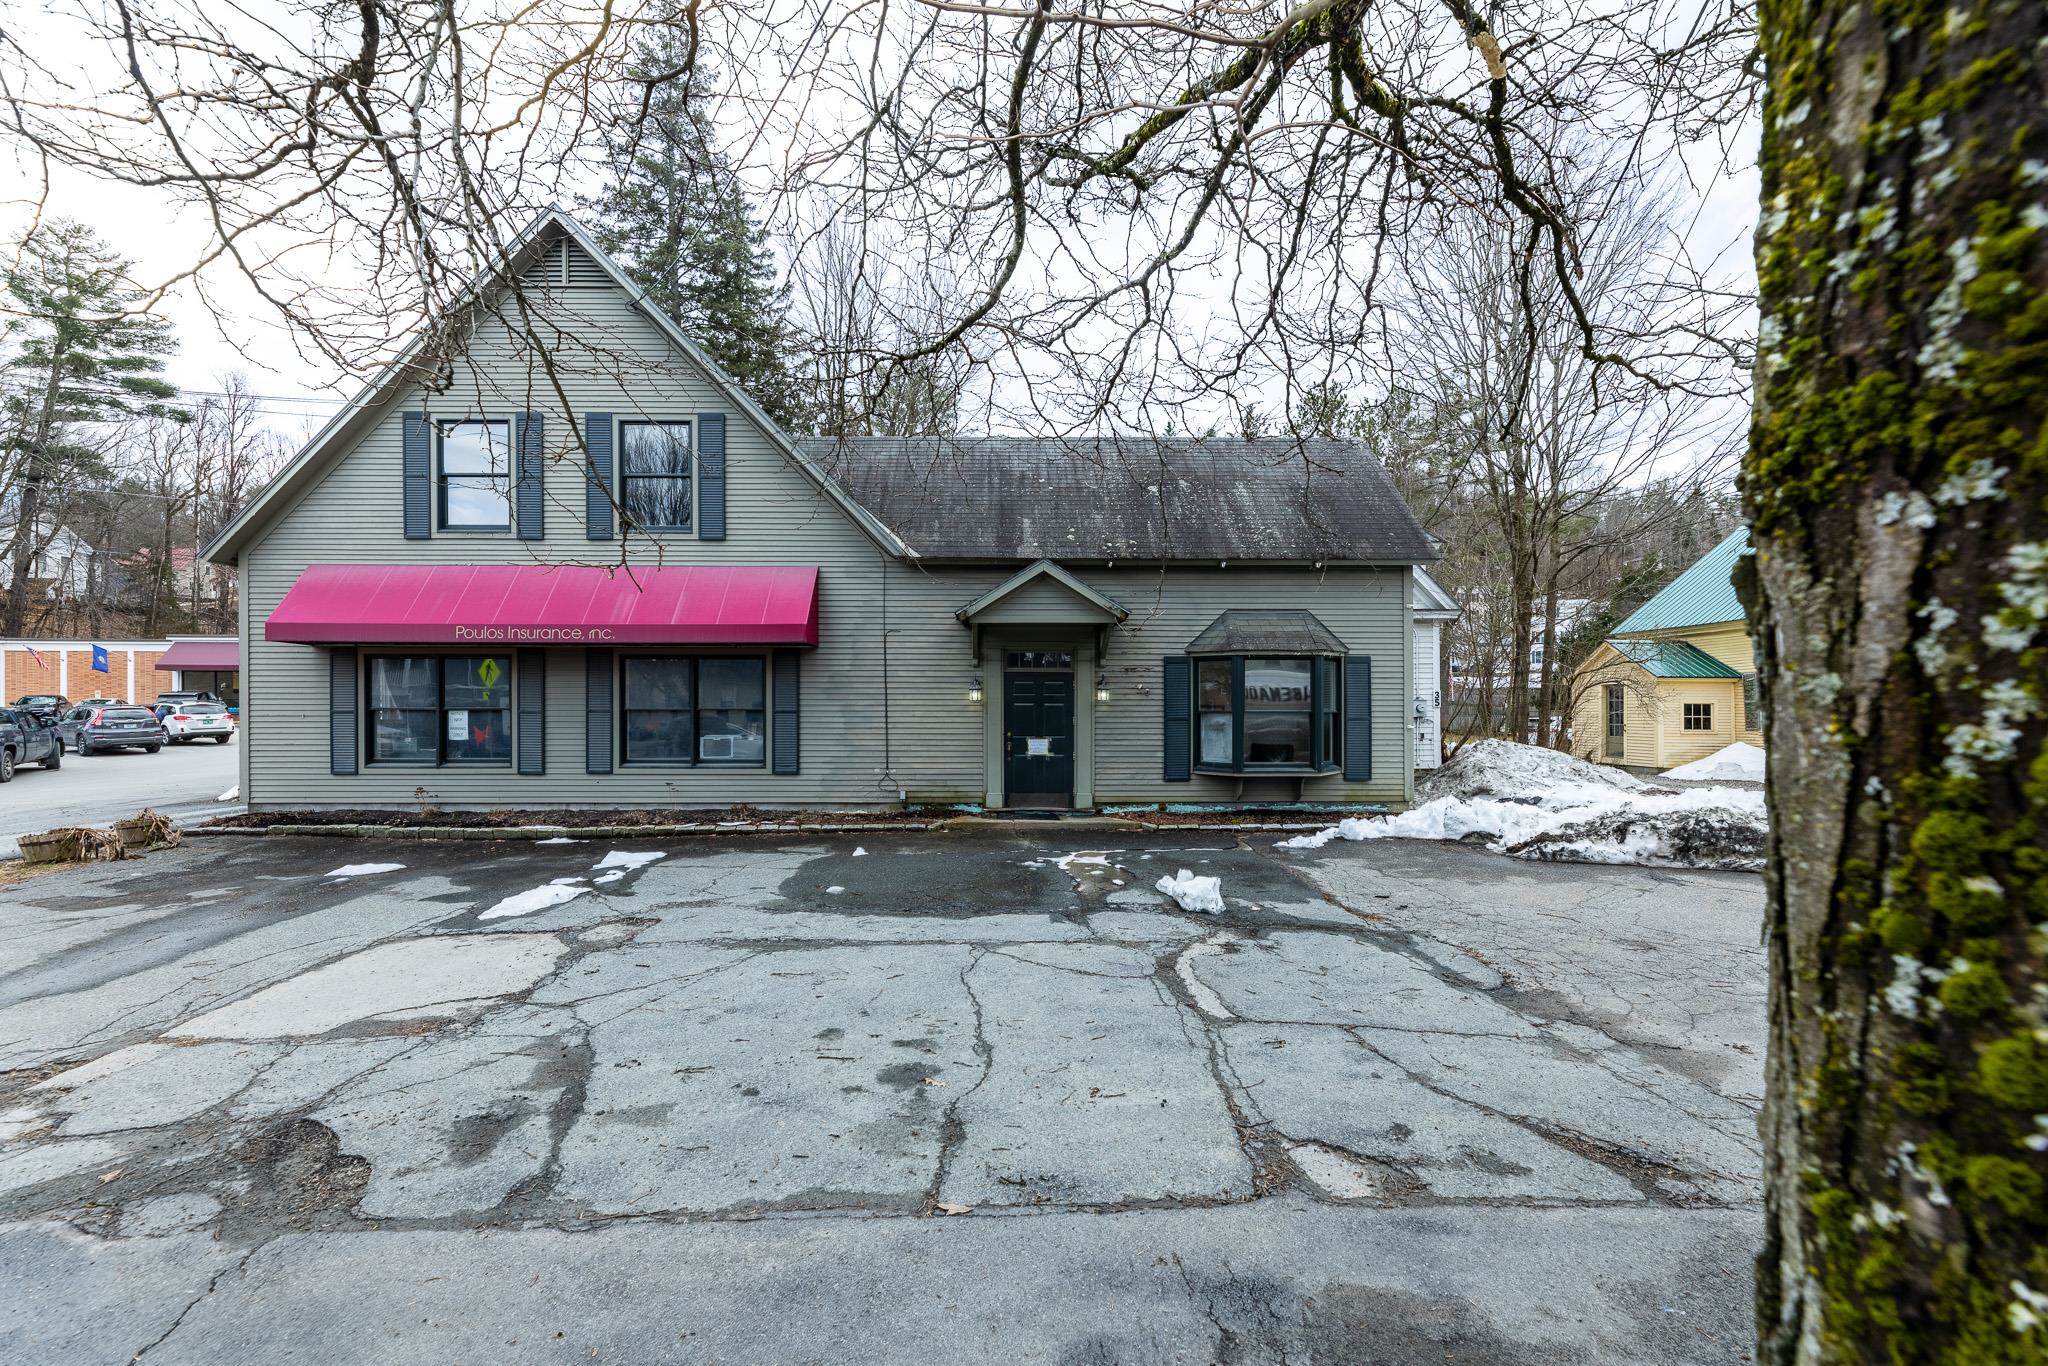 Village of Woodstock in Town of Woodstock VT Commercial Property for sale $$439,000 $204 per sq.ft.